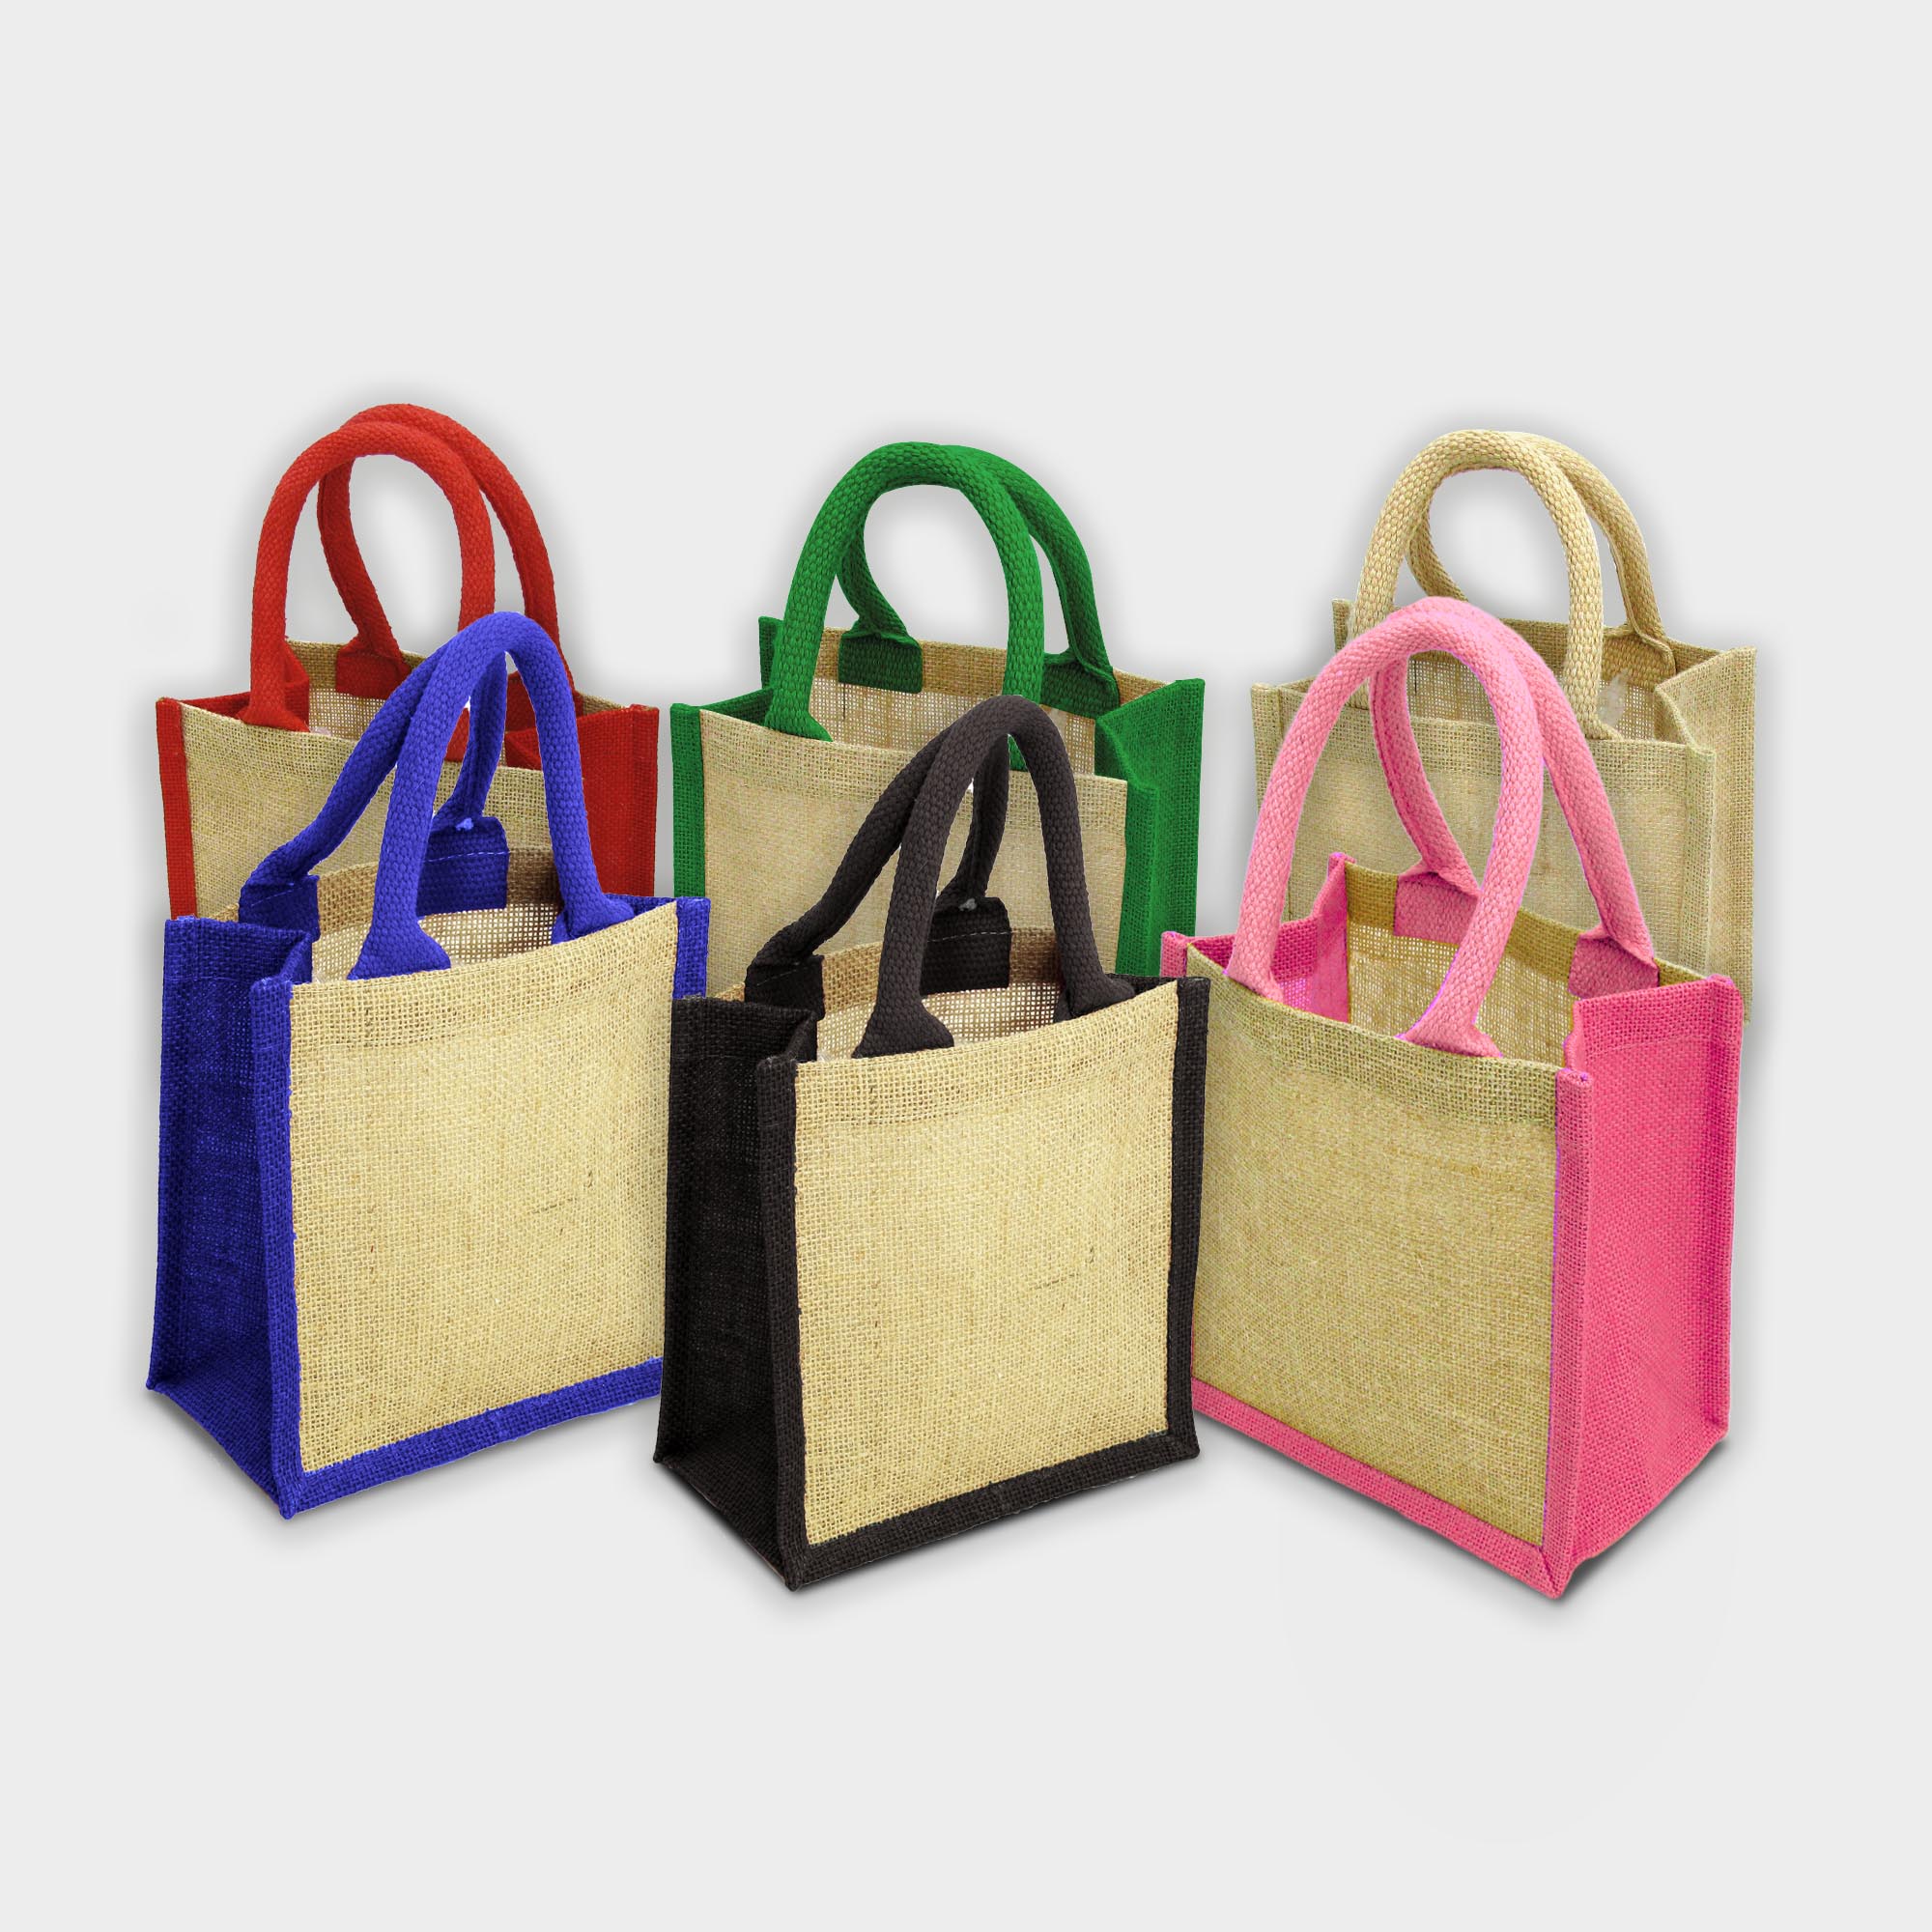 The Green & Good Wells Gift Bag is made from natural and sustainable jute. It comes with a small cotton over rope handle and is available in various trim colours. A perfect accompaniment for an executive gift or small gift set. Ethically produced in India in an audited factory.